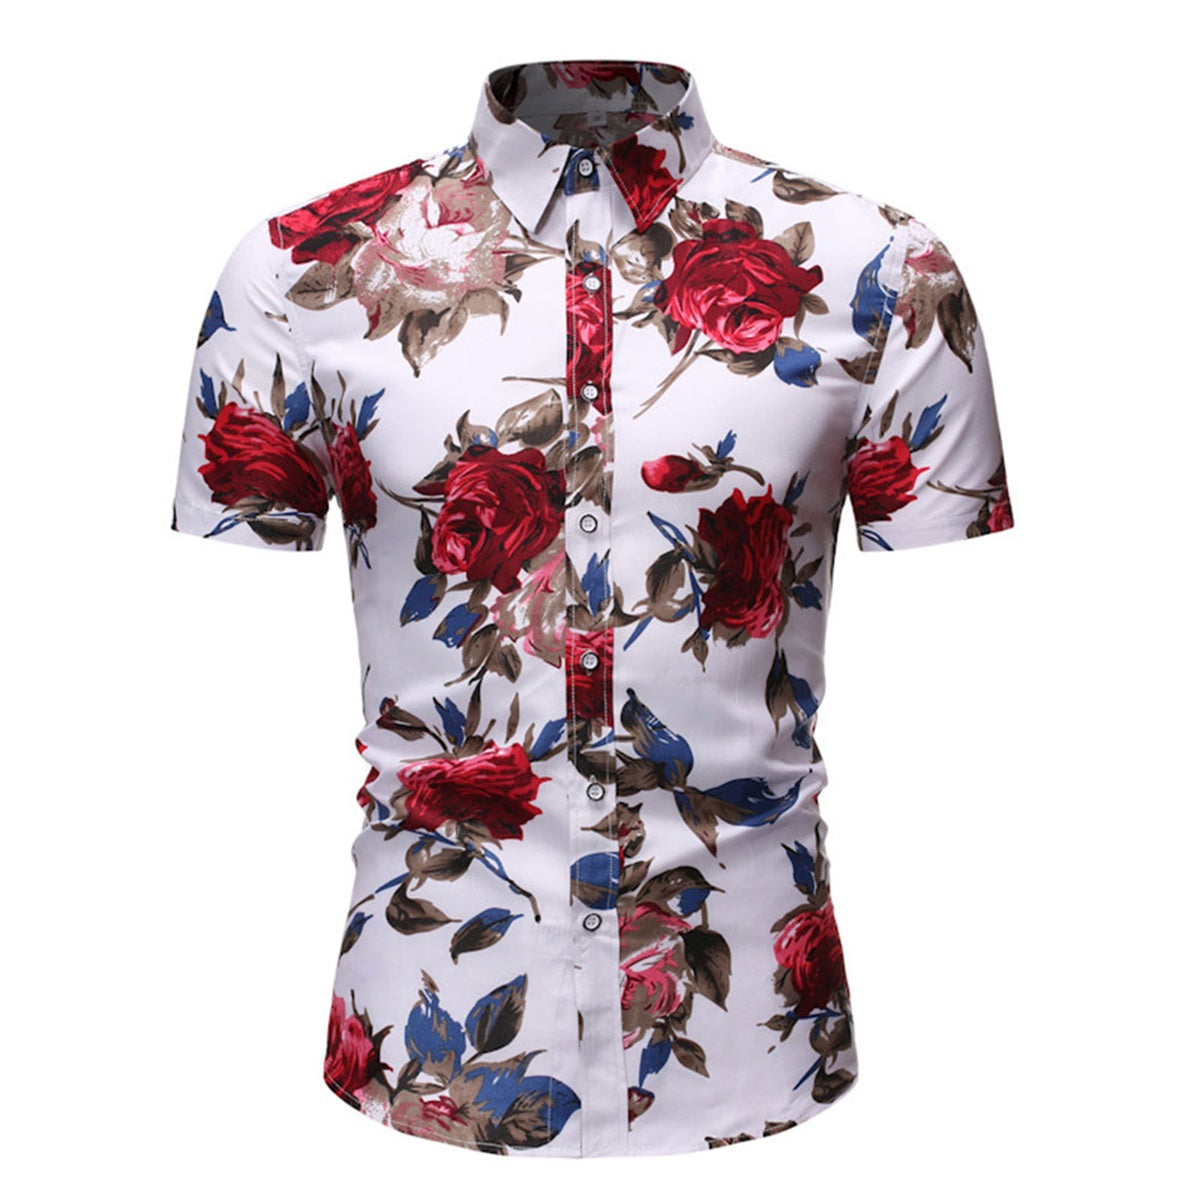 2-Piece Hawaii Red Floral Print Style Summer Suit White